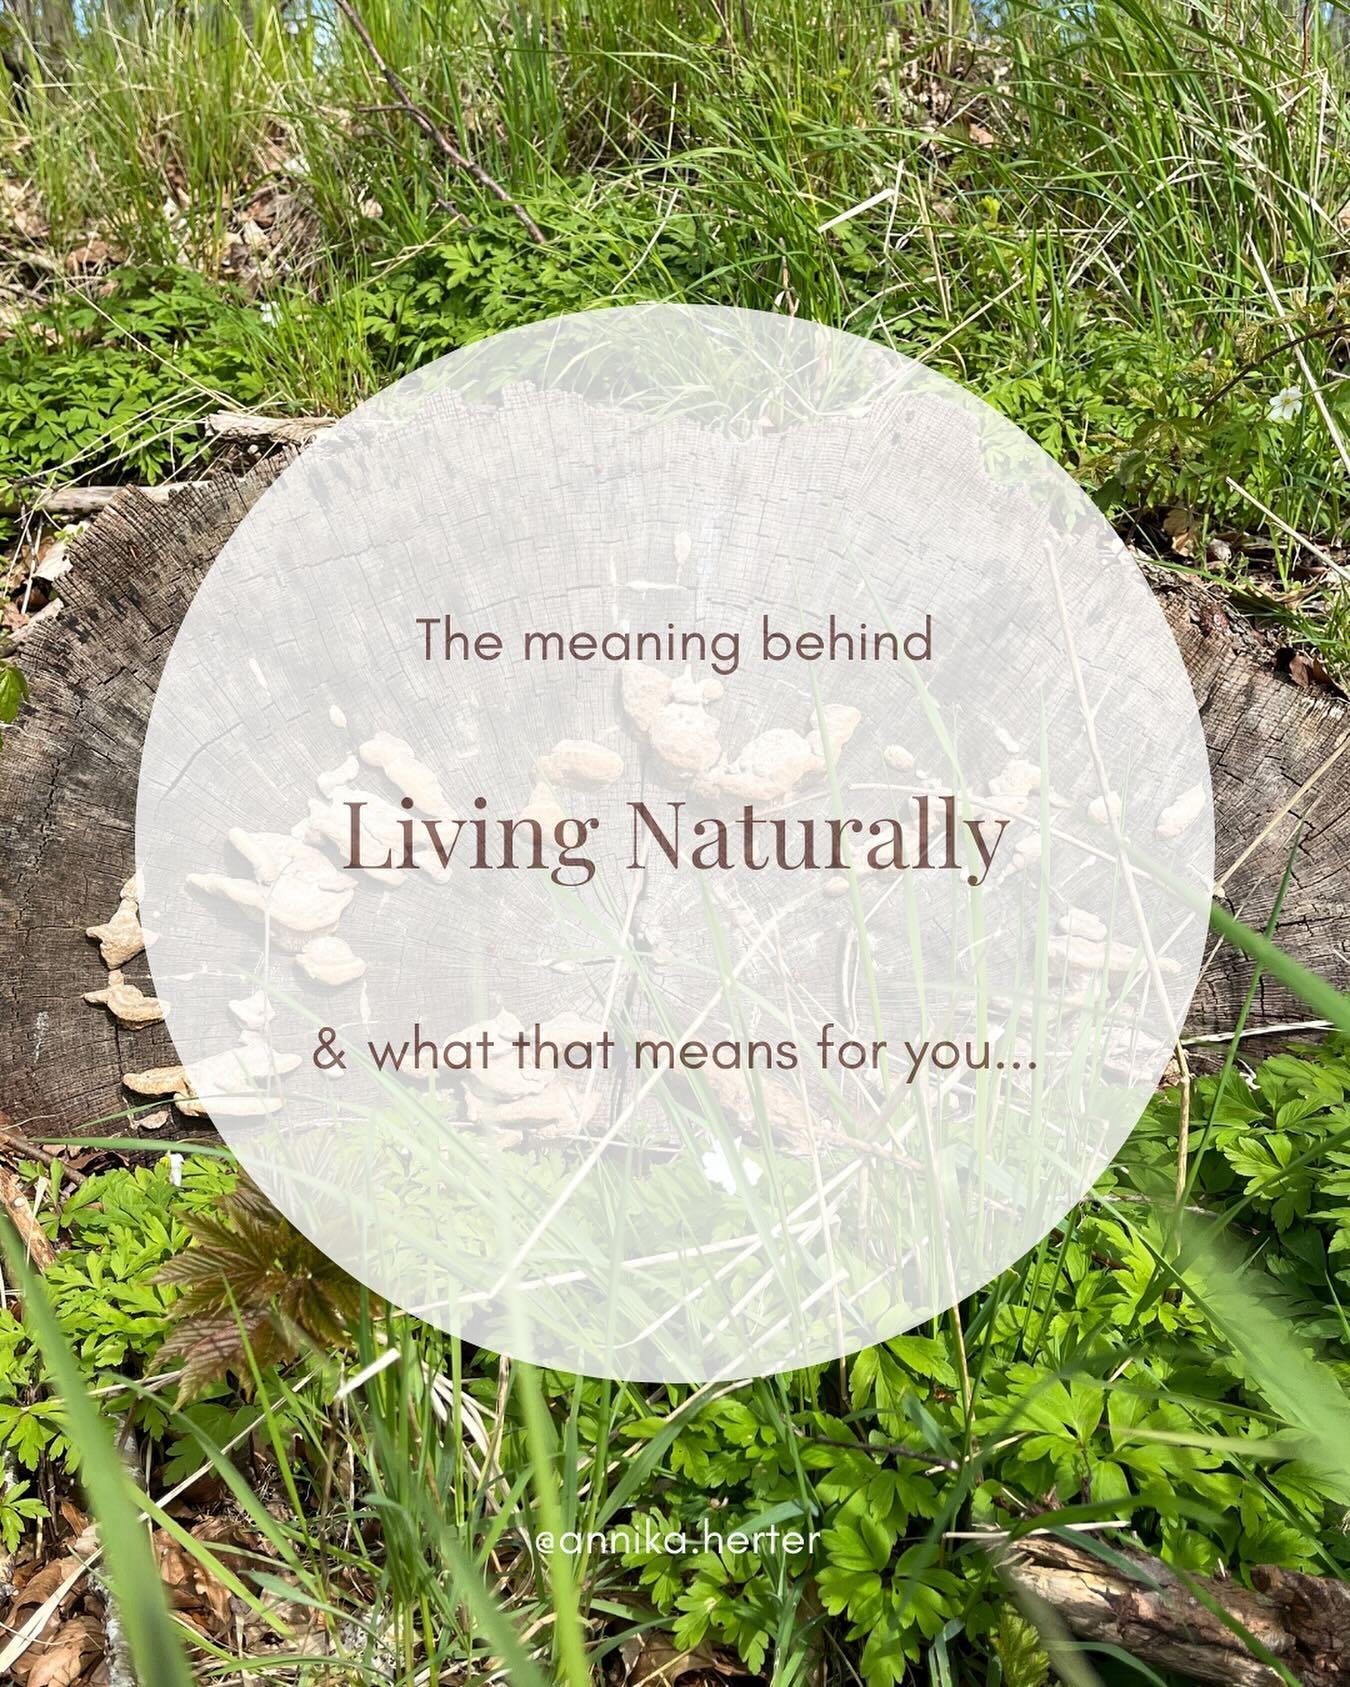 💚Living Naturally&hellip; about the name of my work, the mystical way this came to me &amp; how this relates to you:

The name Living Naturally came to me, at night, in my dreams and yet, I wasn&rsquo;t dreaming. The name came to me out of the black